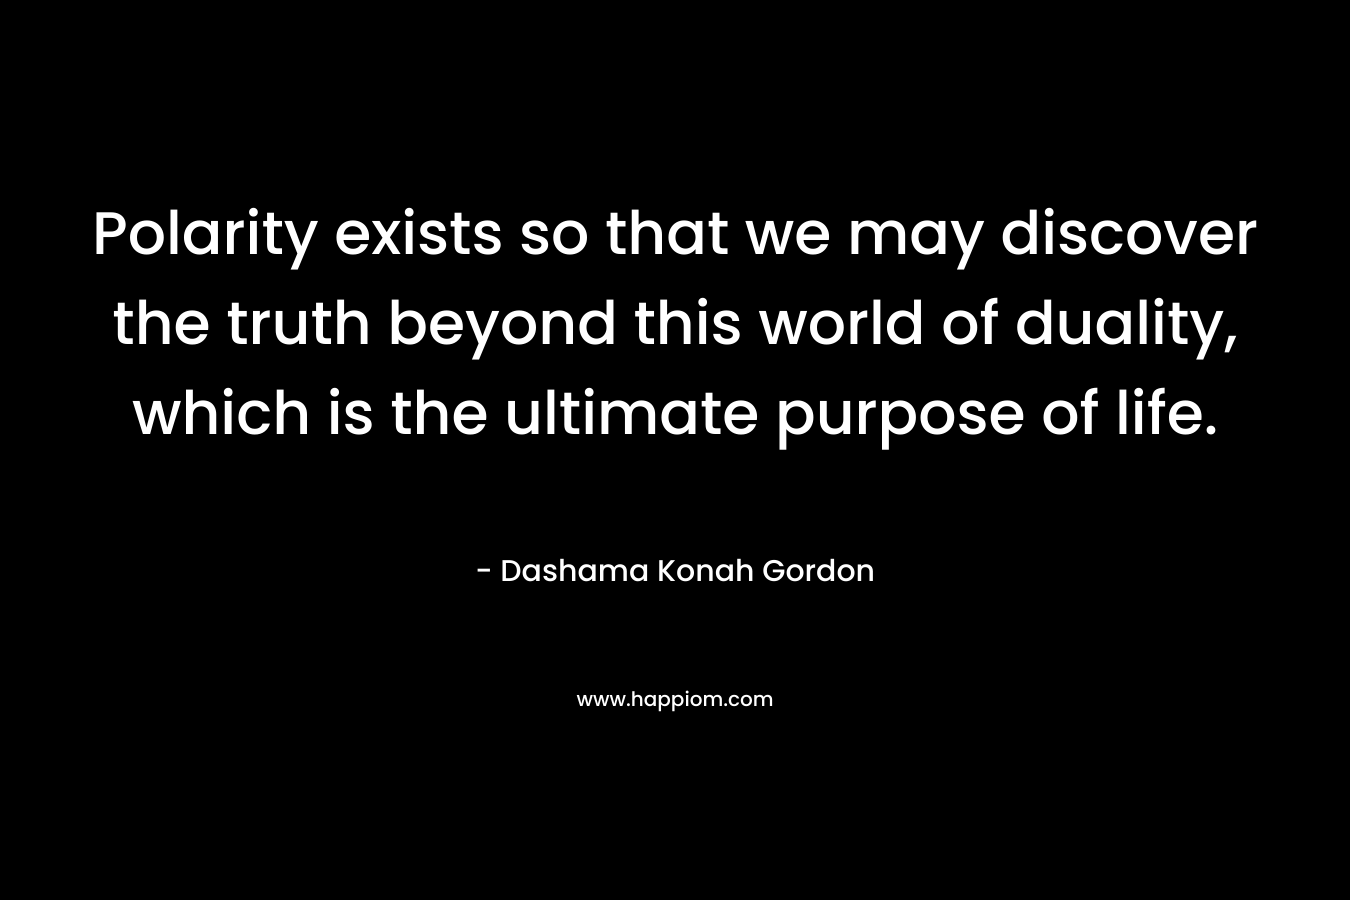 Polarity exists so that we may discover the truth beyond this world of duality, which is the ultimate purpose of life. – Dashama Konah Gordon